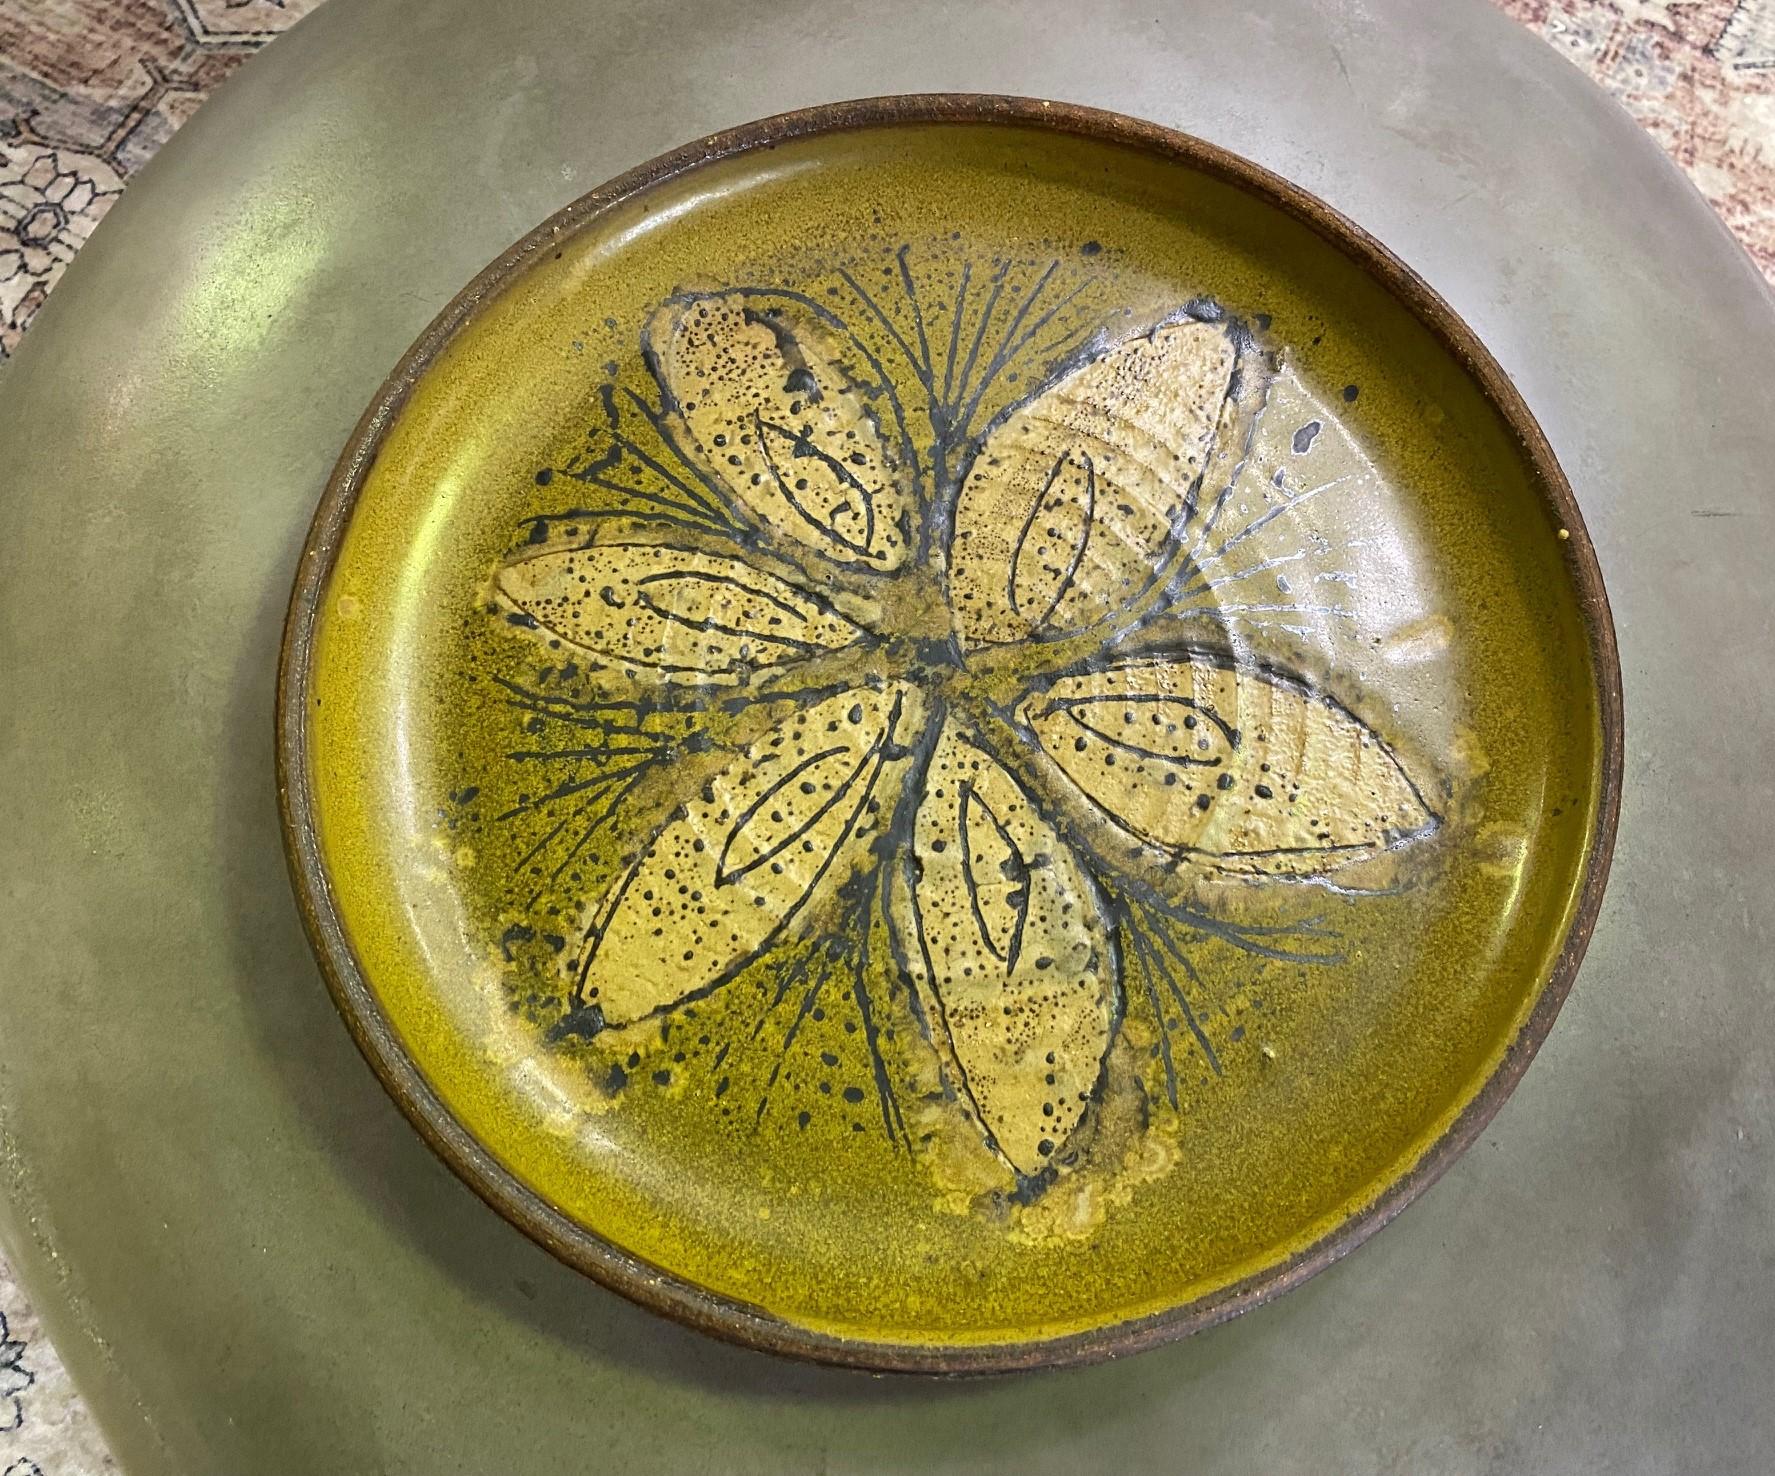 A fabulous modern pottery bowl by famed Southern California potter artist Frank Matranga. The bowl is beautifully handcrafted and hand-painted.

Matranga studied with F. Carlton Ball and Susan Peterson in the 1960s and spent two years under the